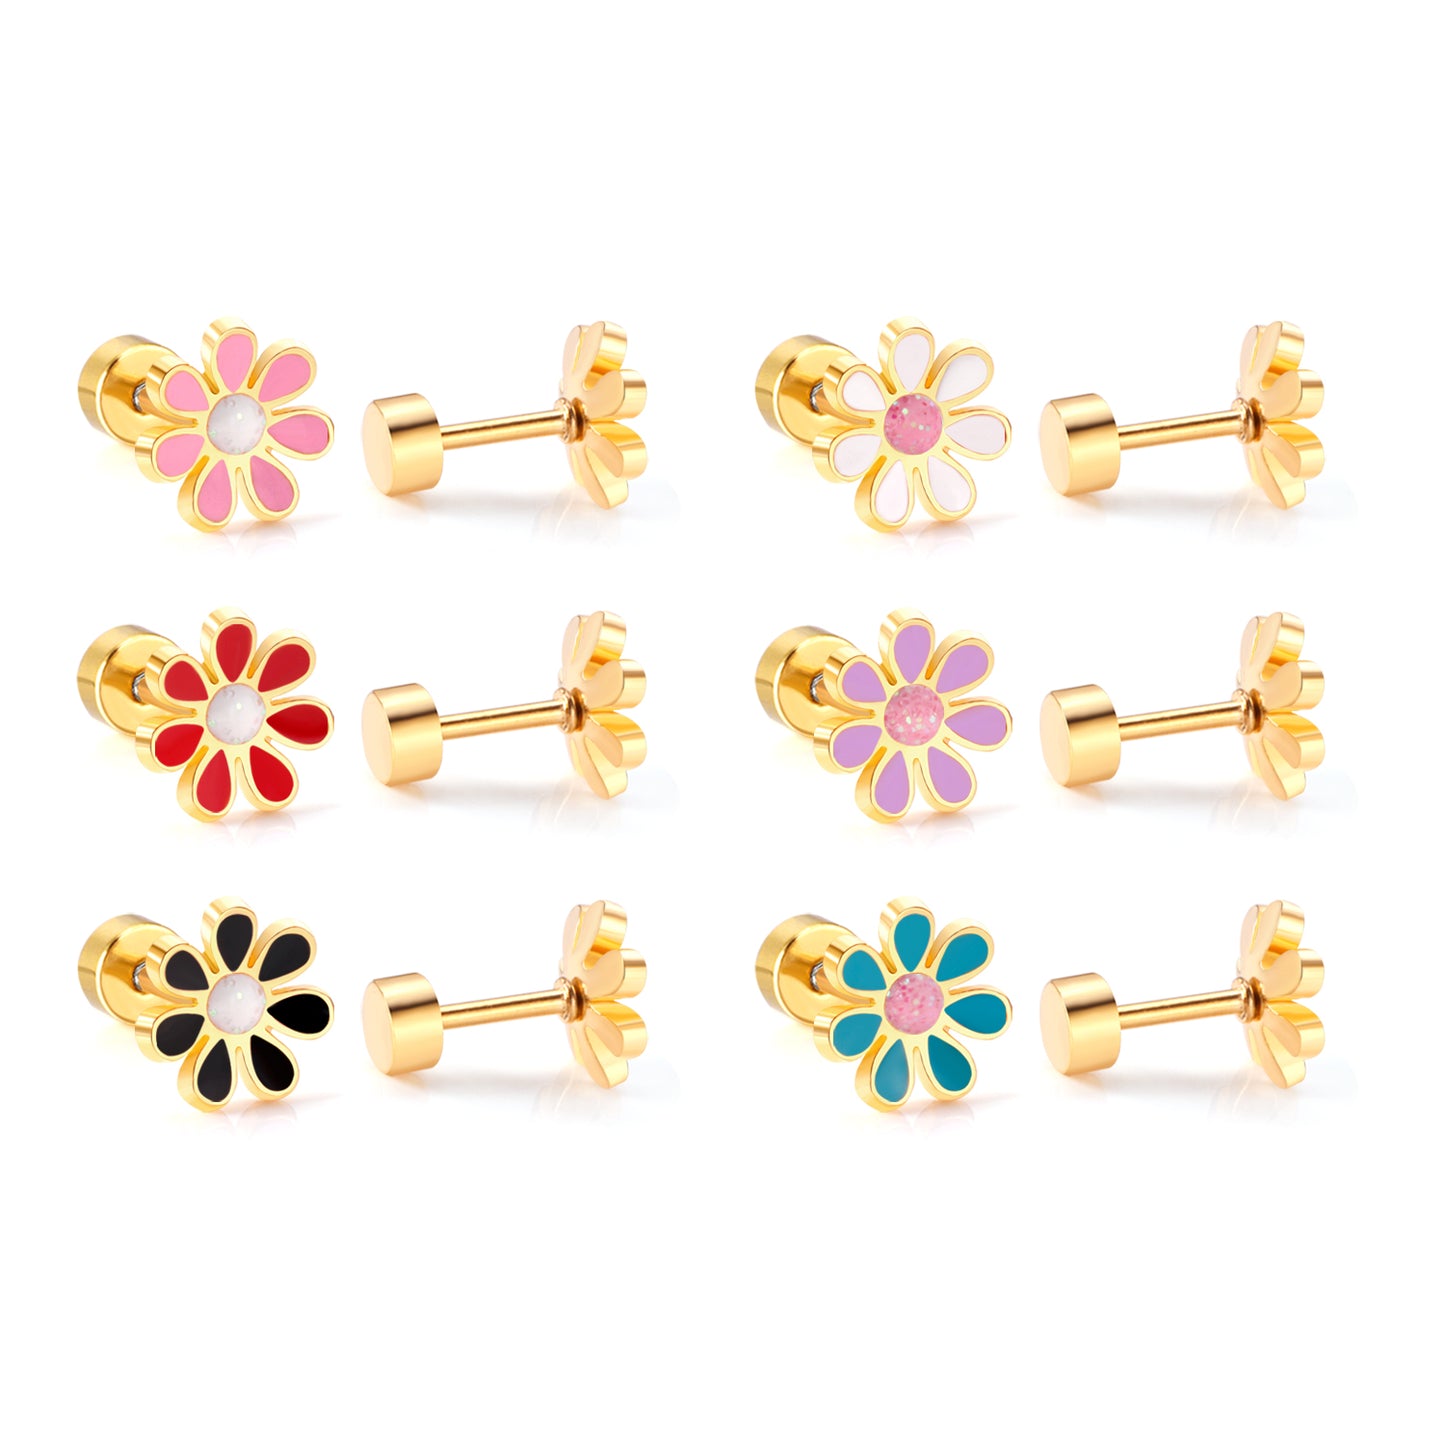 Children's Earrings:  Surgical Steel with Gold IP Pink/White Flowers with Screw Backs